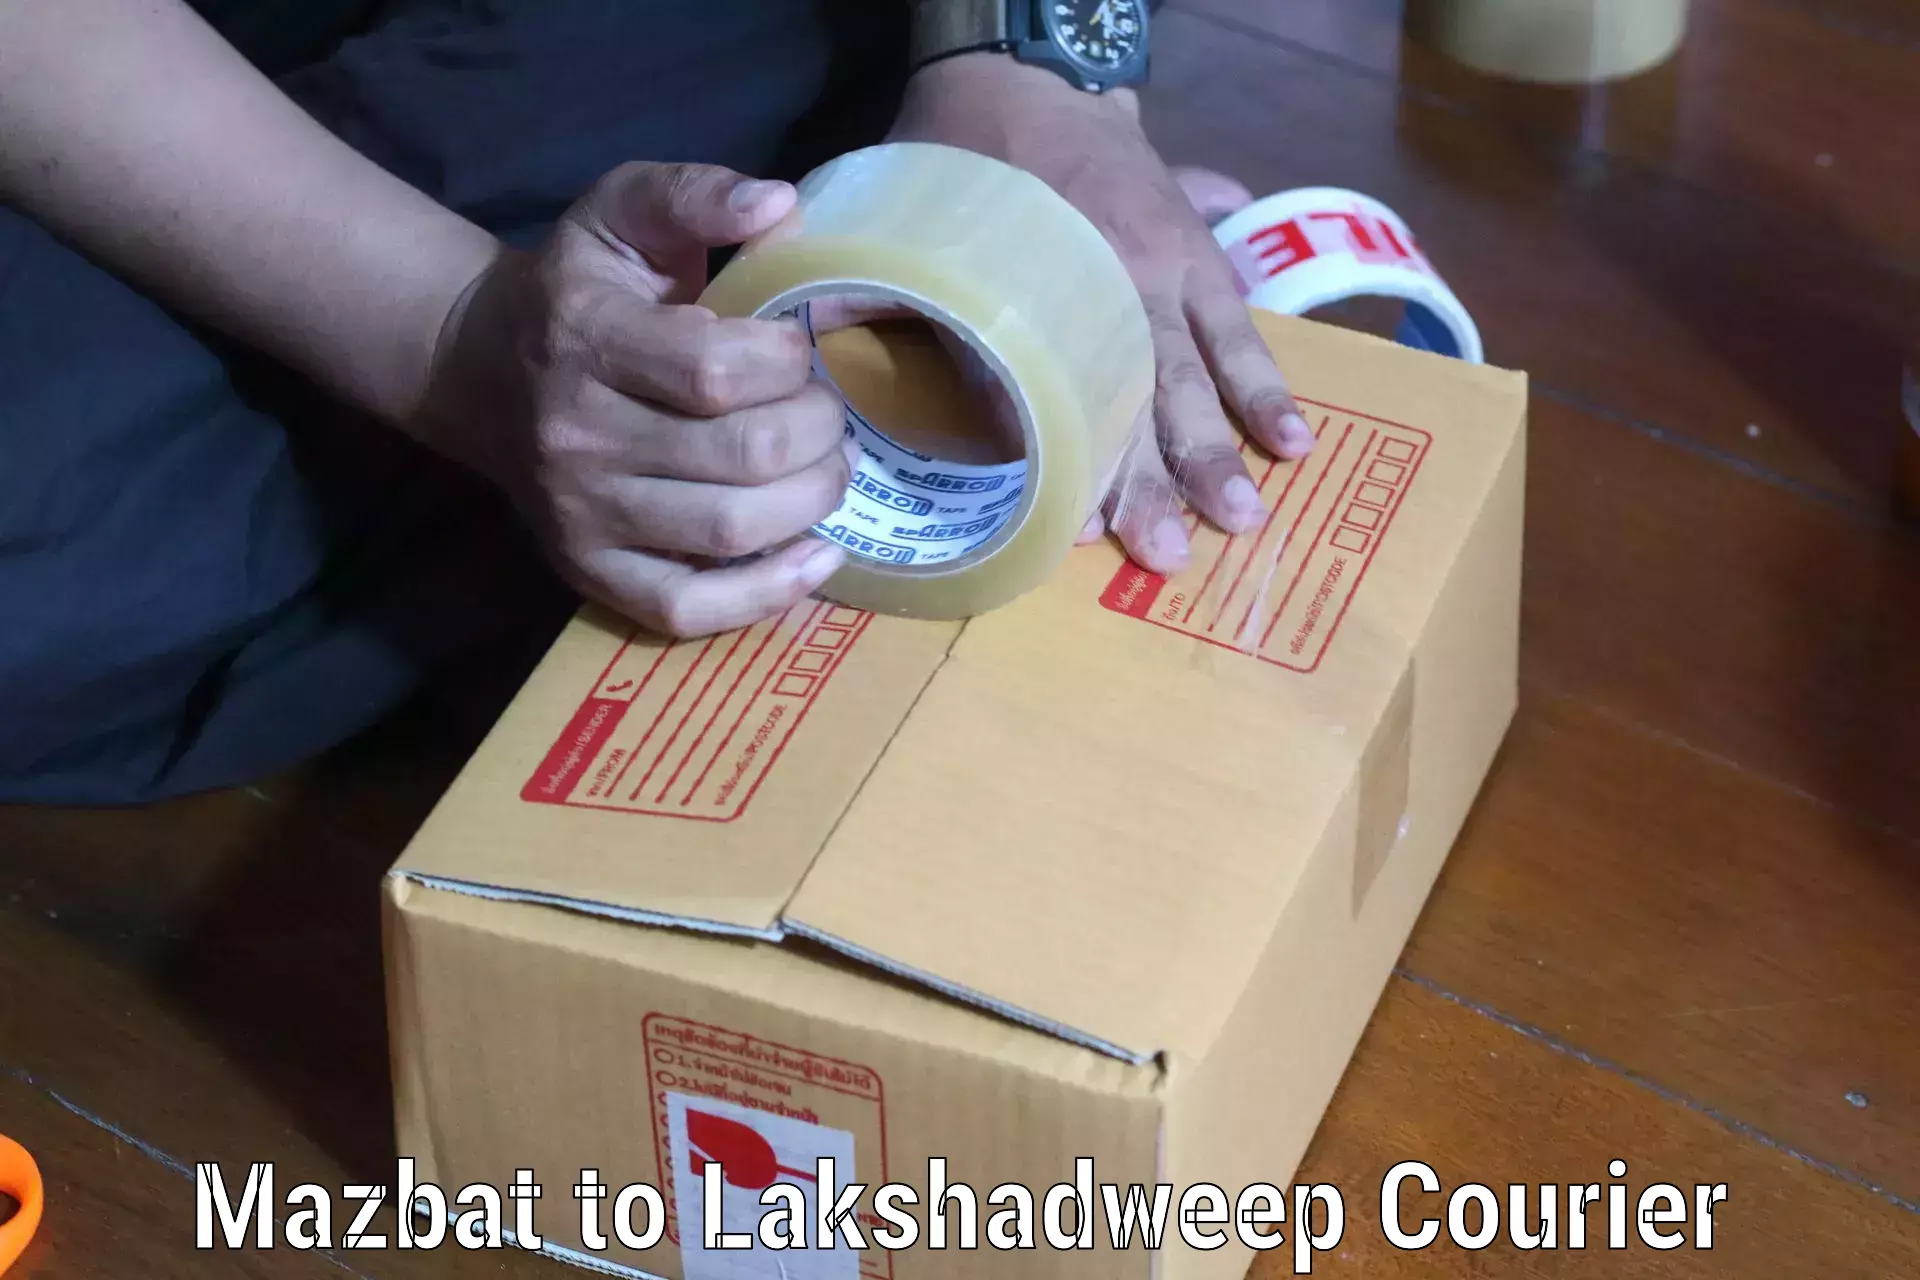 Customer-centric shipping in Mazbat to Lakshadweep